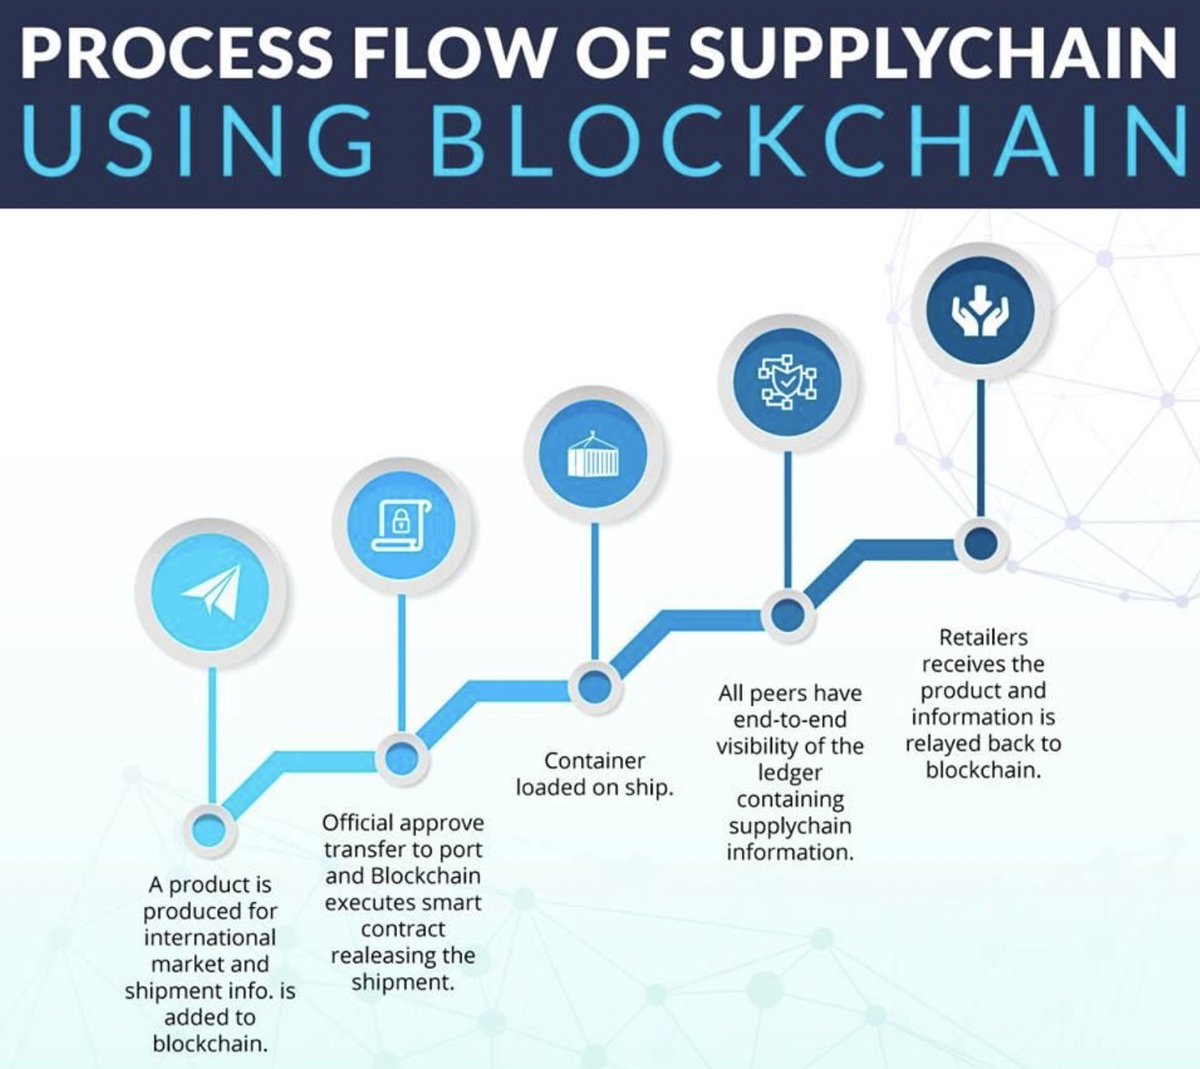 #Infographic: A look at the process flow of supply chain using #blockchain! #SupplyChain #Automation #RFID #Barcode #Manufacturing #IoT #ERP #Cloud #AI #Technology #QRCode #TrackAndTrace cc: @lindagrass0 @mvollmer1 @evankirstel @HeinzVHoenen @antgrasso @Nicochan33 @KirkDBorne